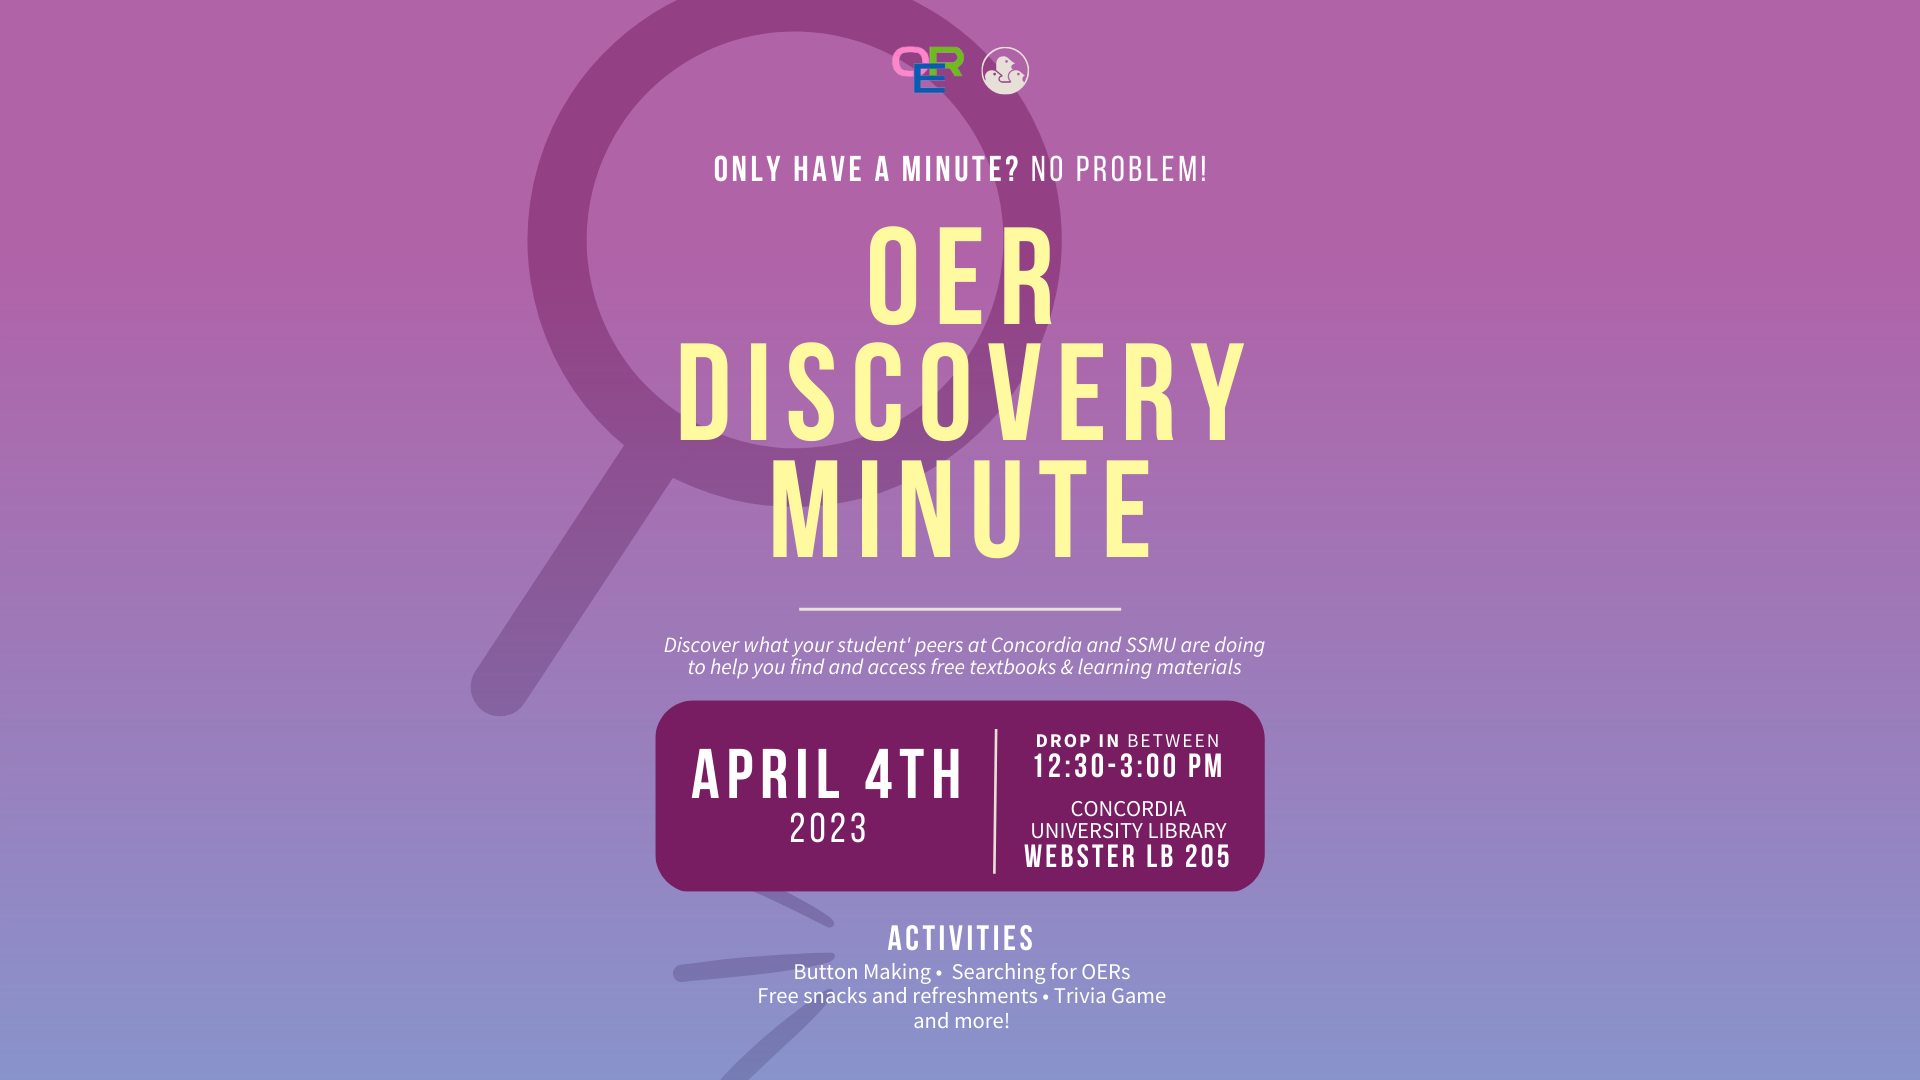 OER DISCOVERY MINUTE